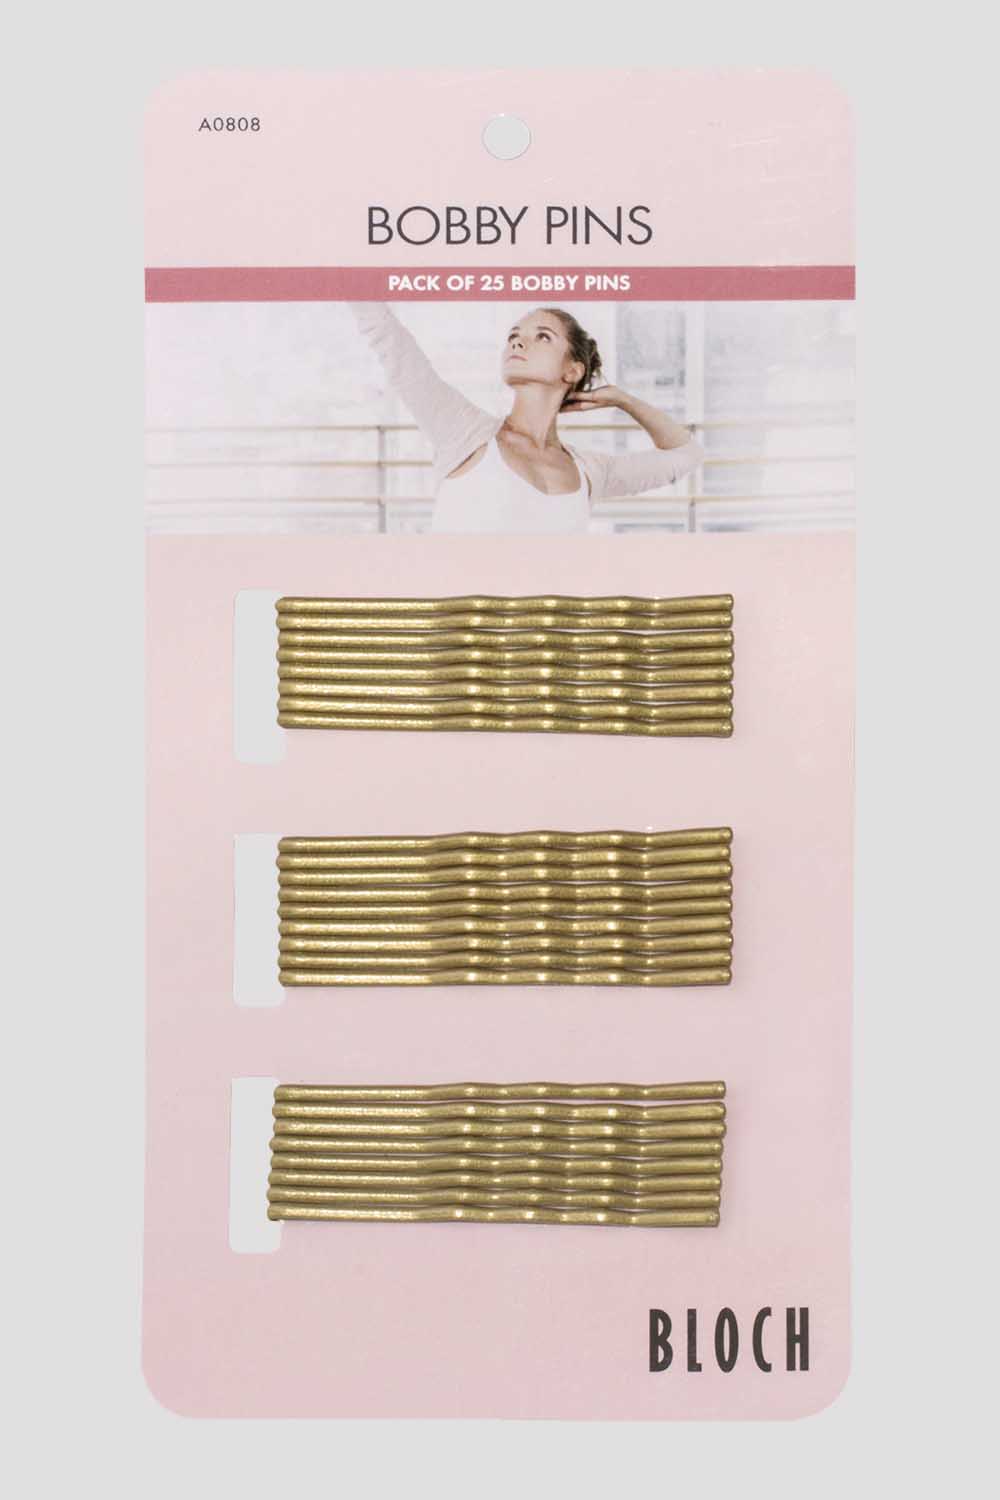 BLOCH Bobby Pins Pack, Blonde